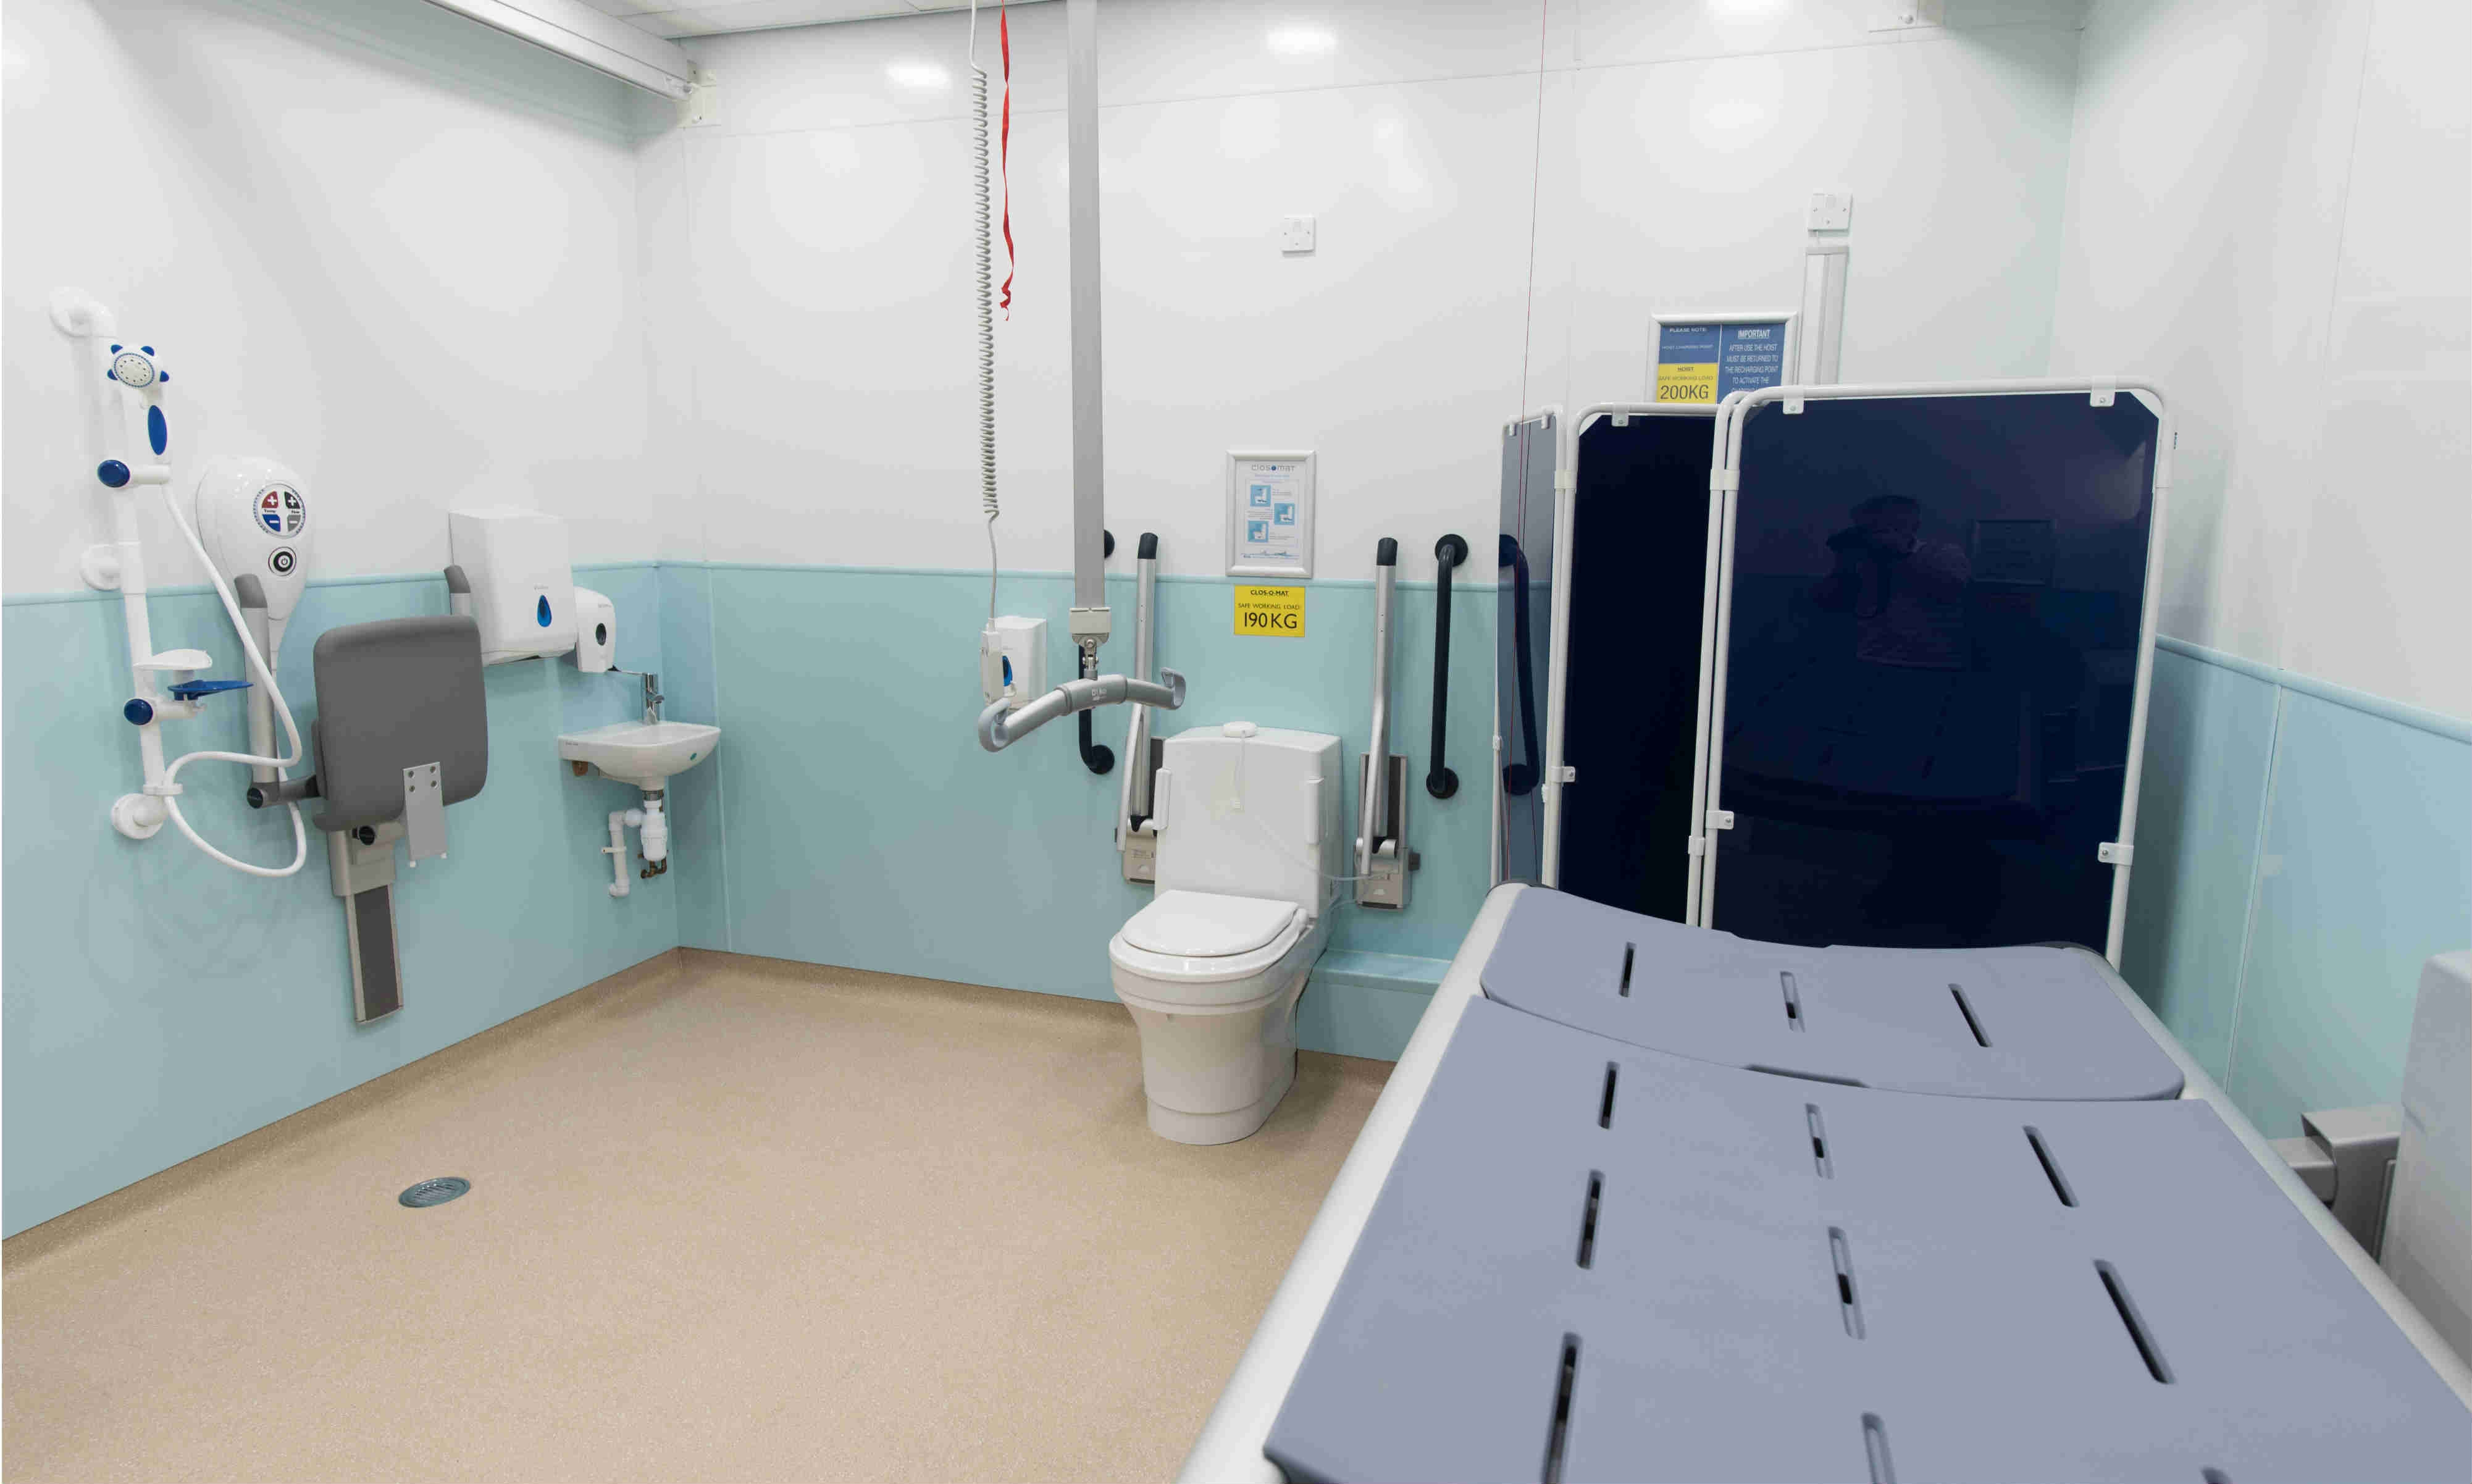 School toilet guidelines updated - new summary document published